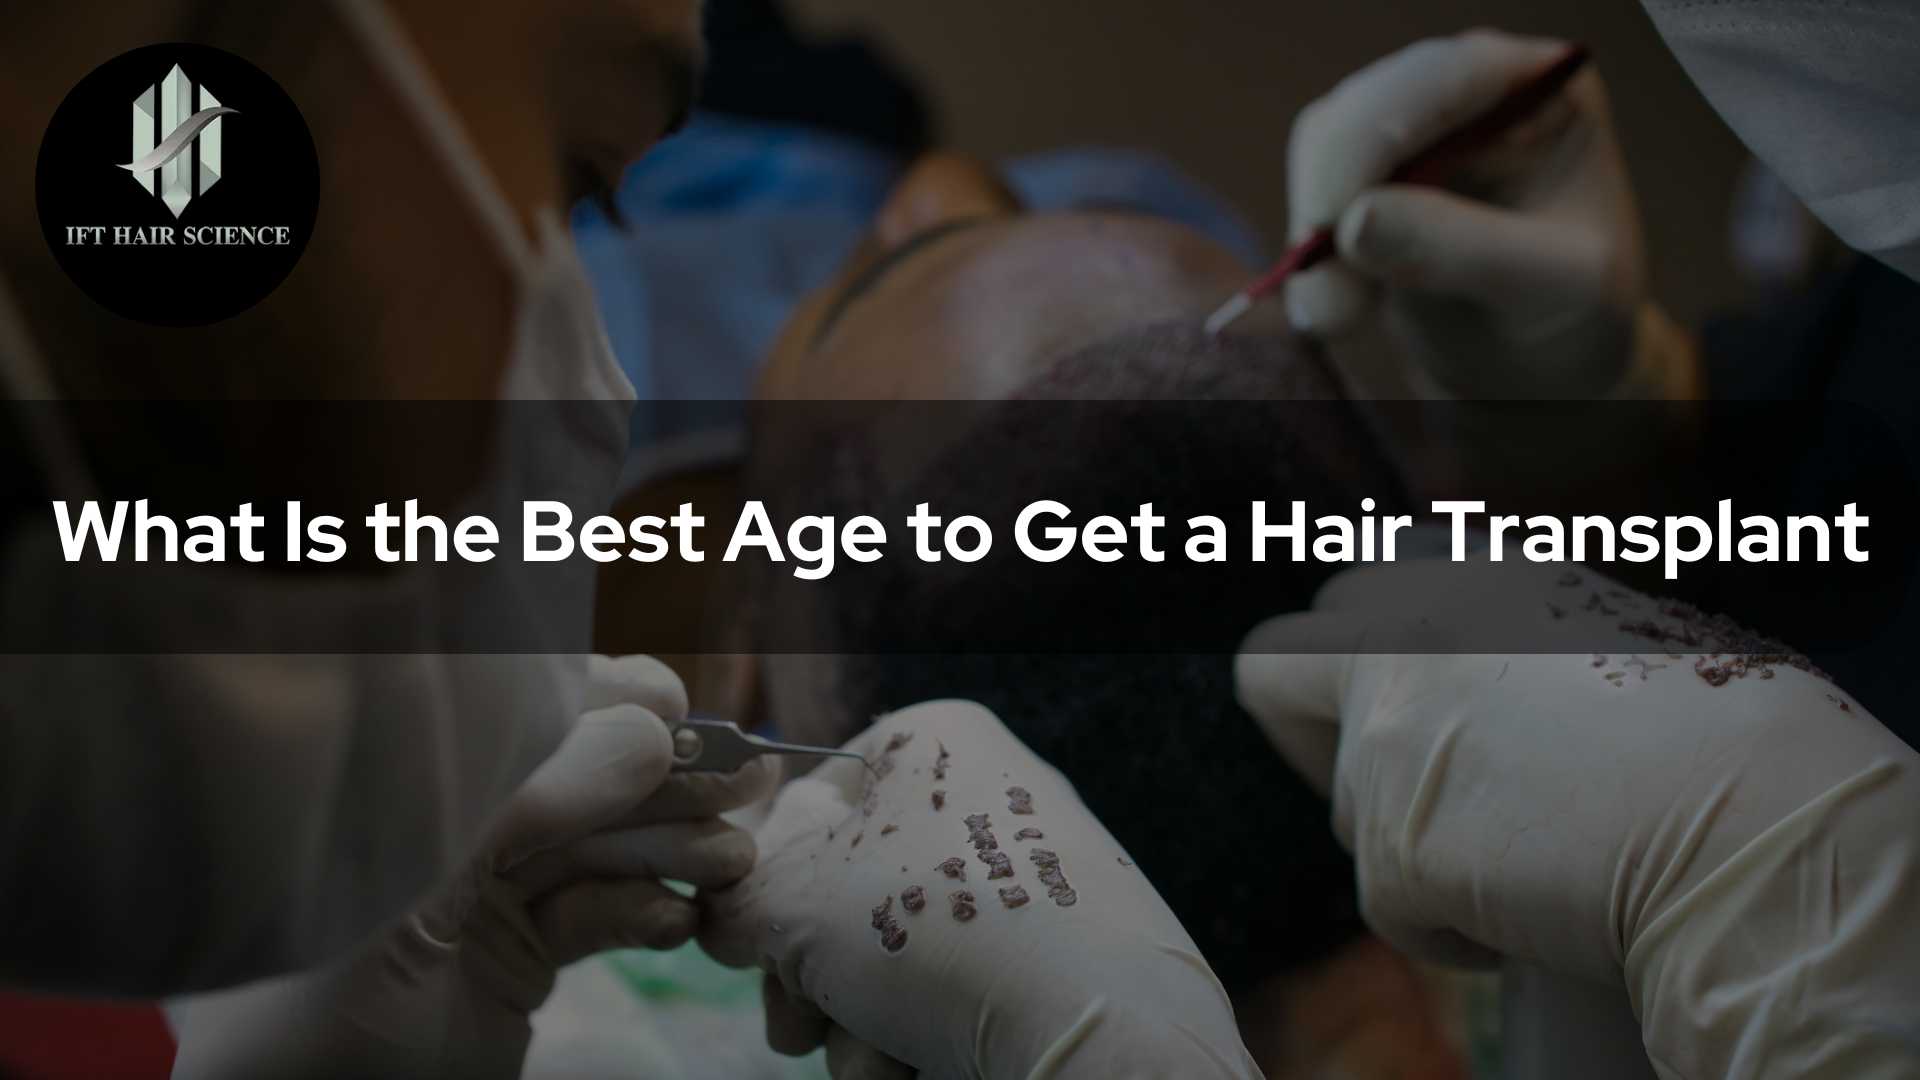 What Is the Best Age to Get a Hair Transplant?